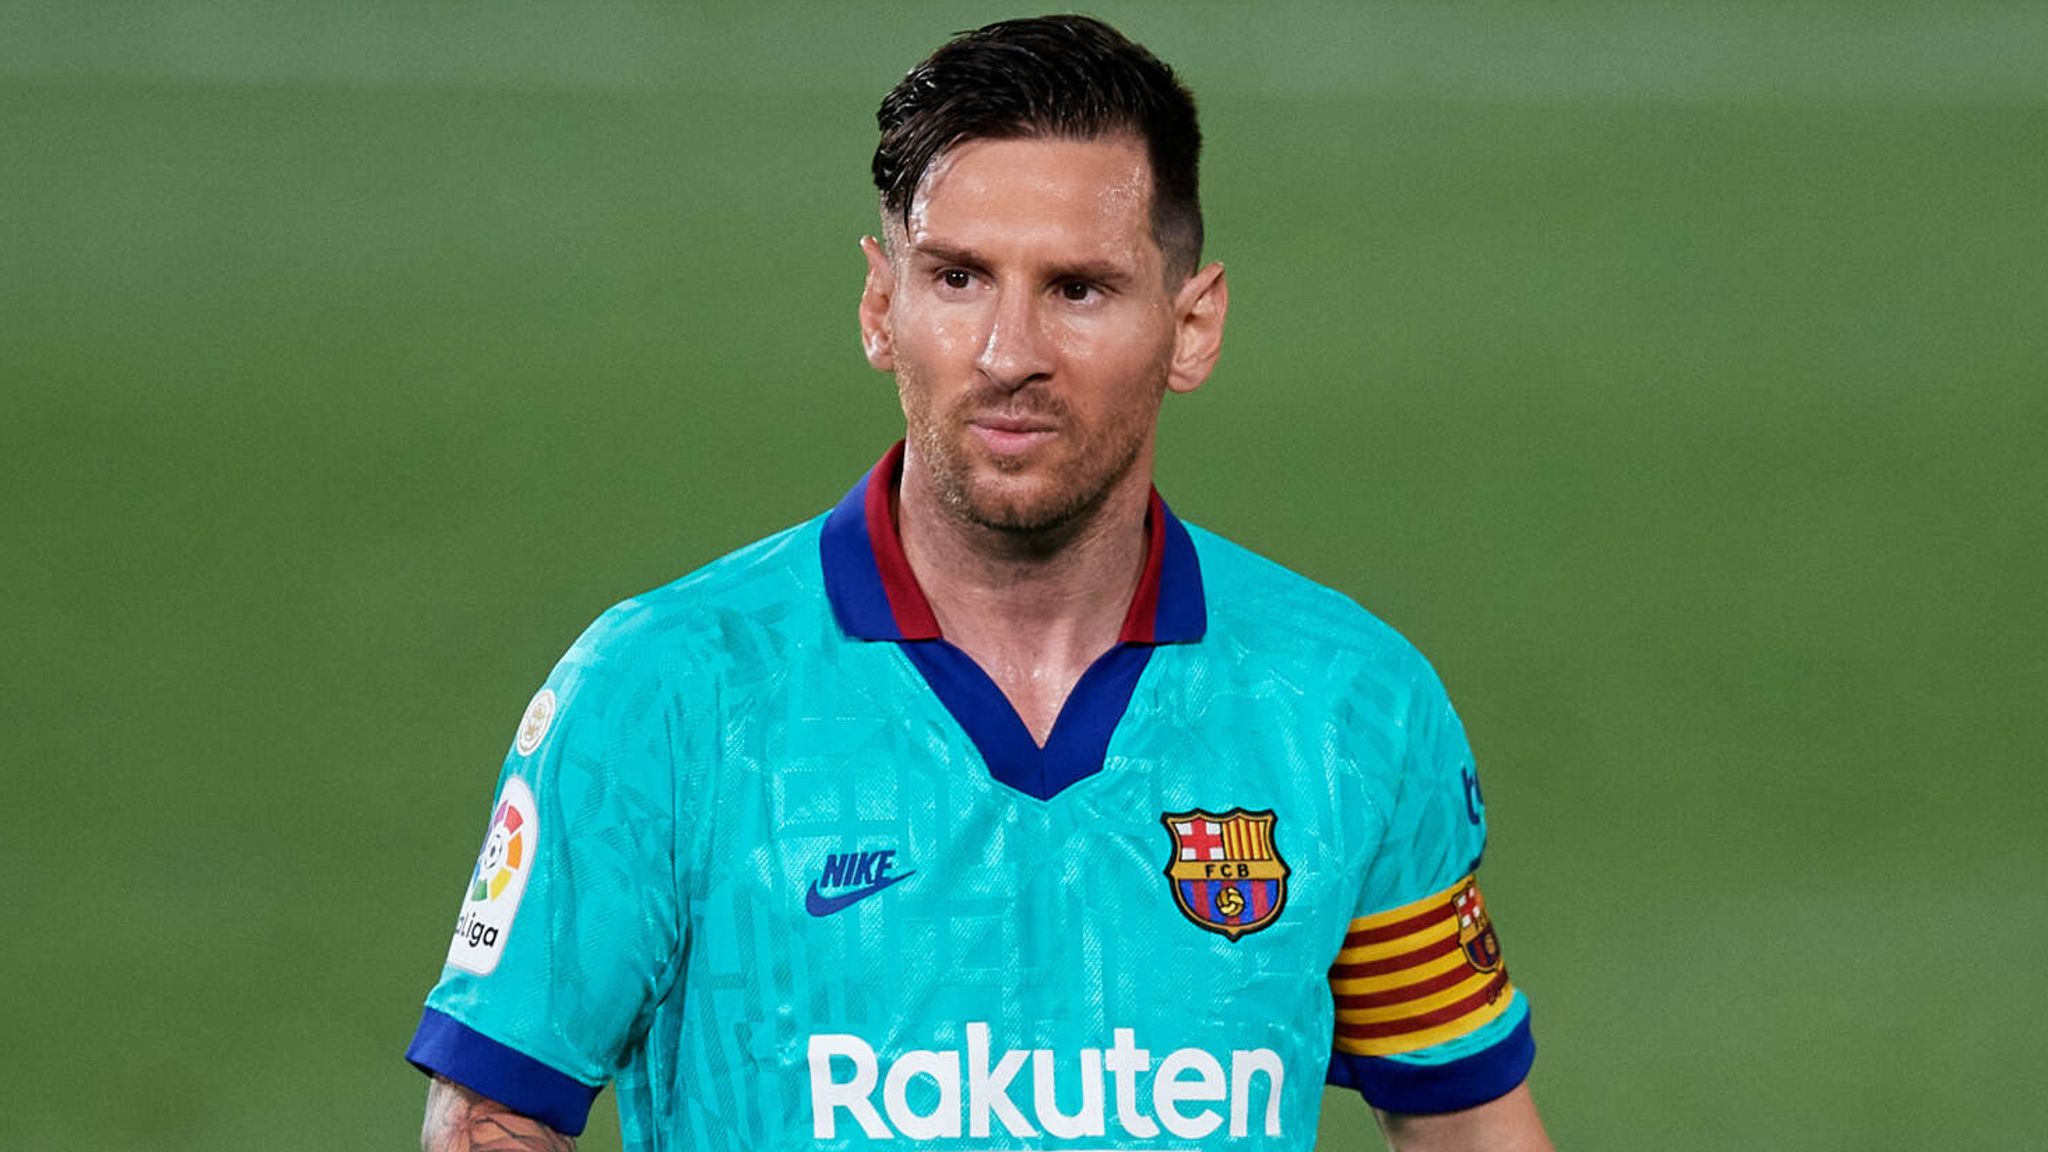 messi green jersey